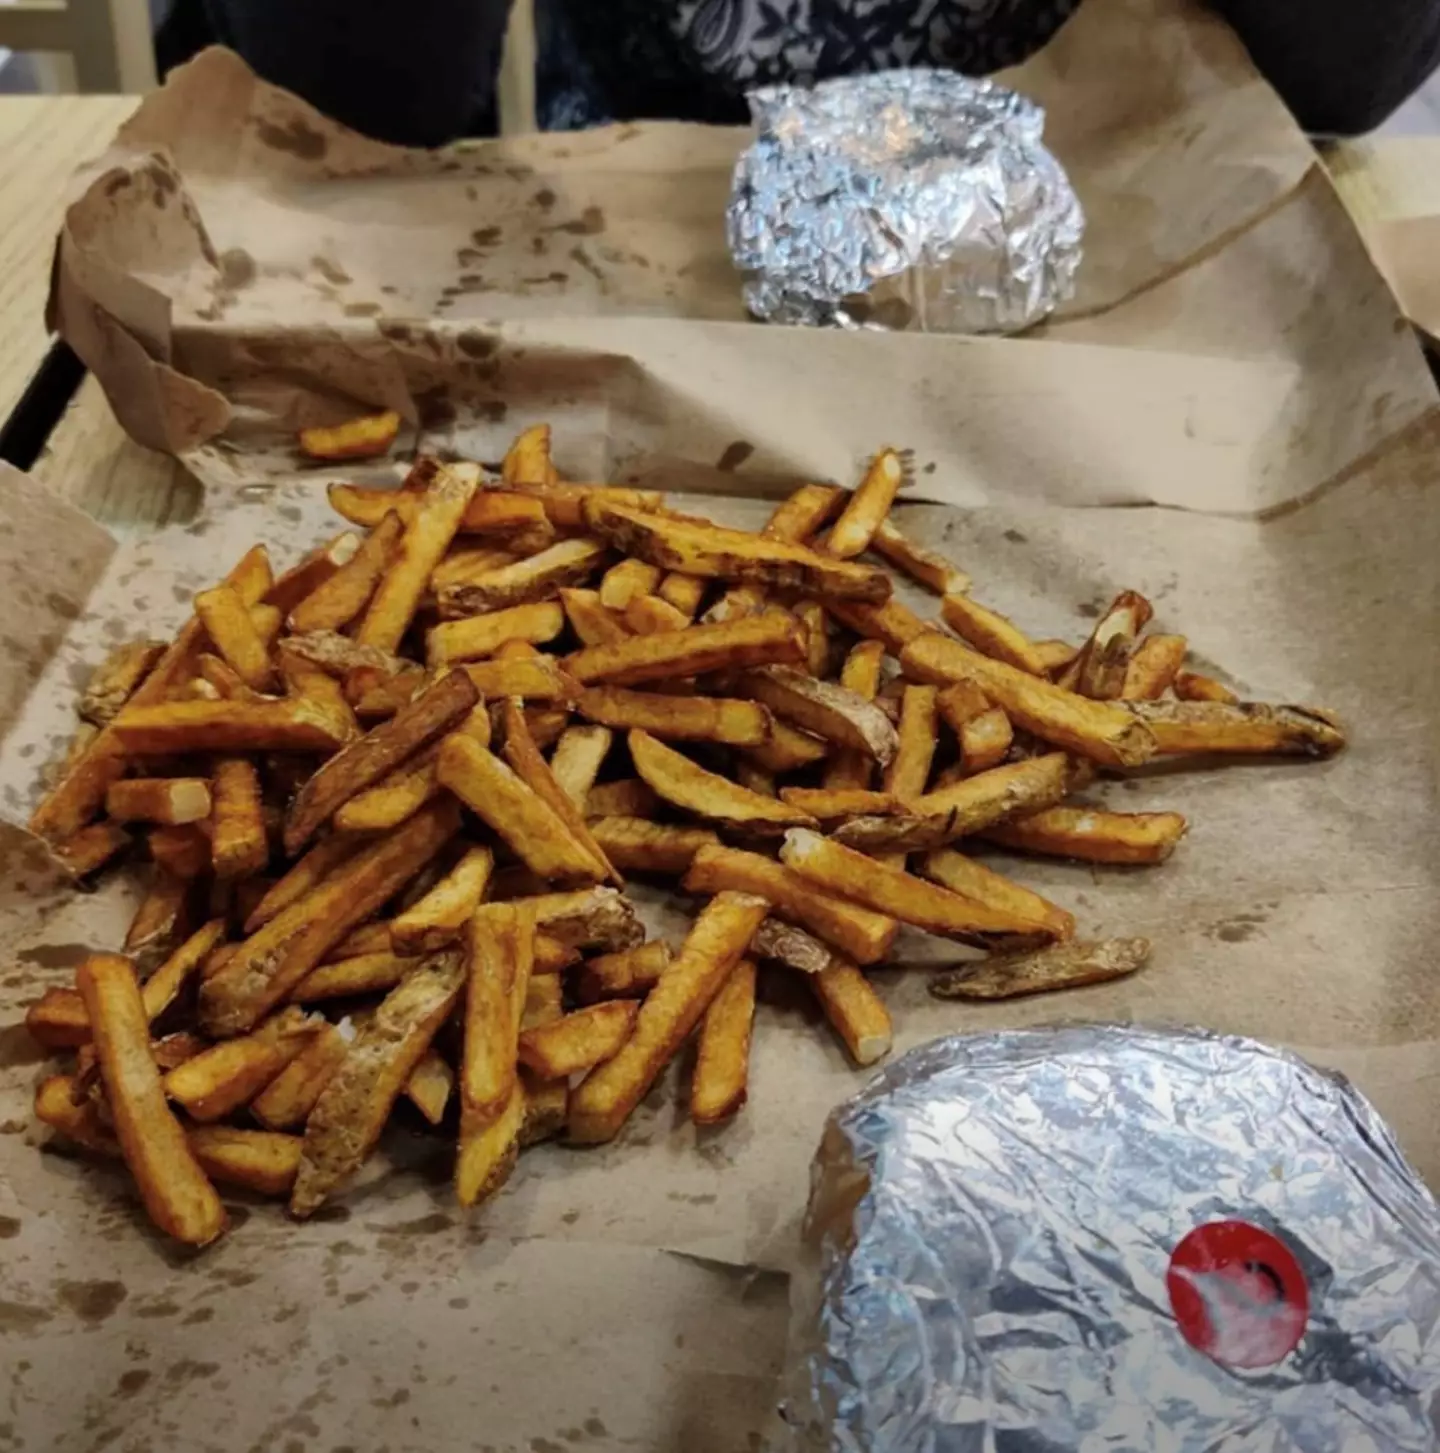 Founder Jerry Murrell says some people complain that they’ve been given too many fries.